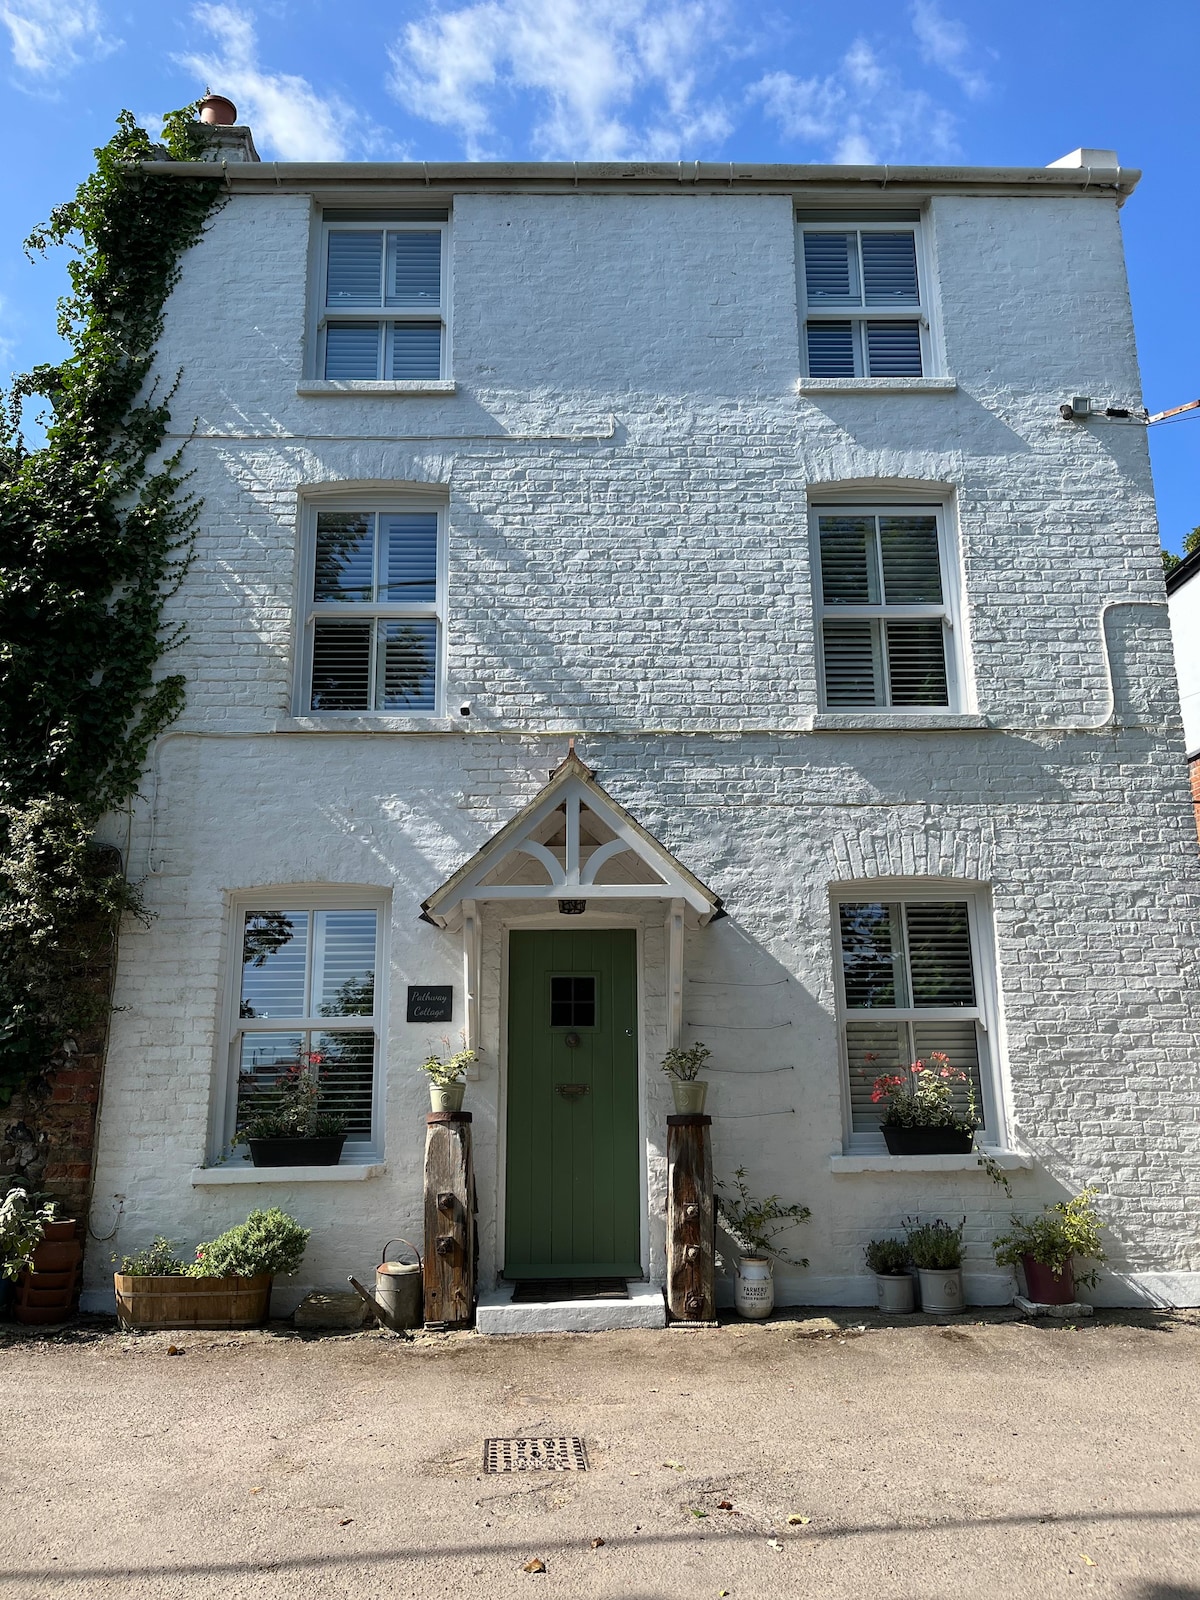 Cosy cottage in the centre of Broadstairs